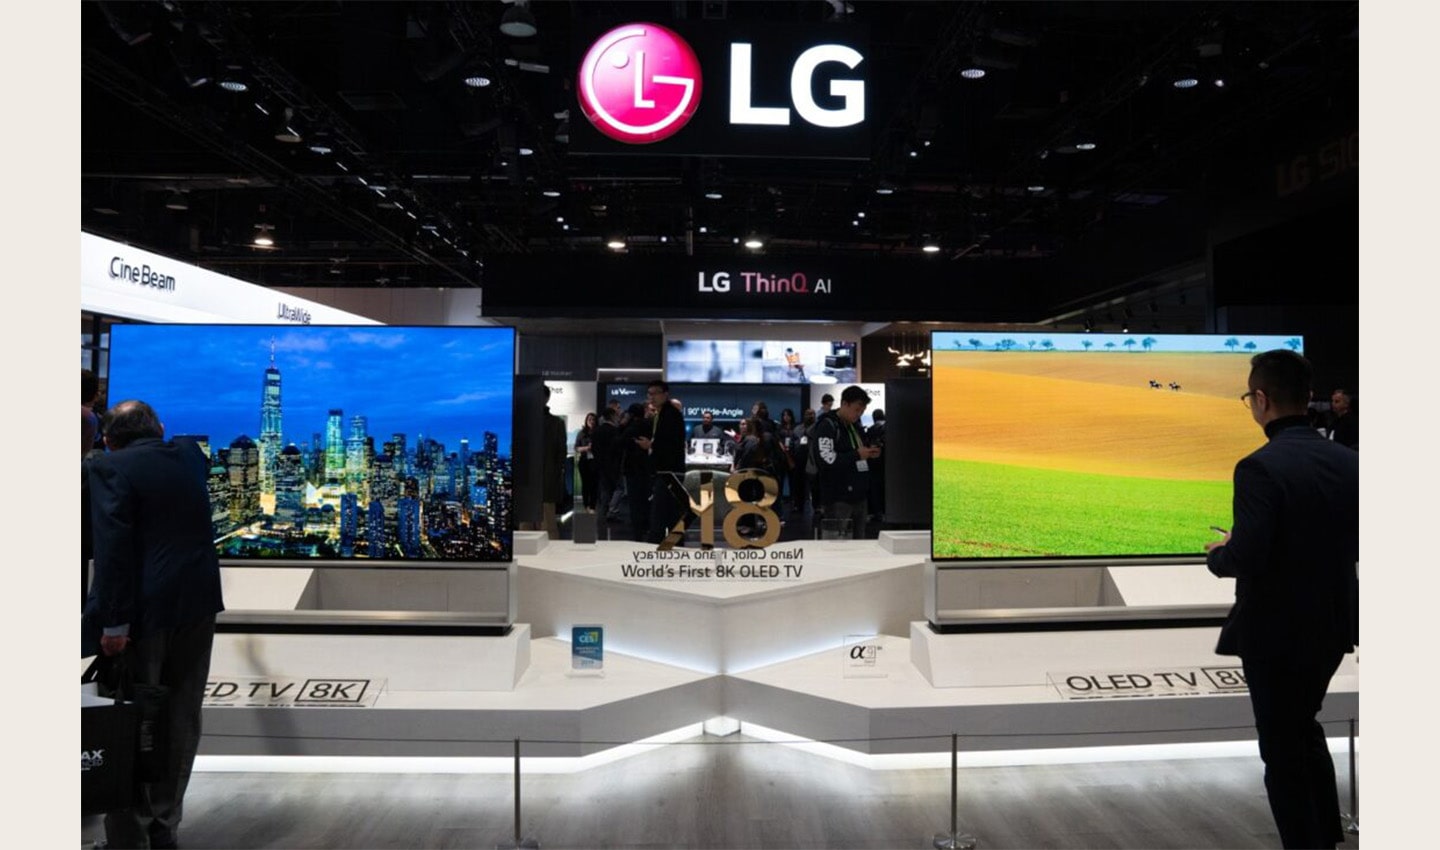 Front view of the LG 8K OLED TV display zone with two 8K models at the company's booth during CES 2019